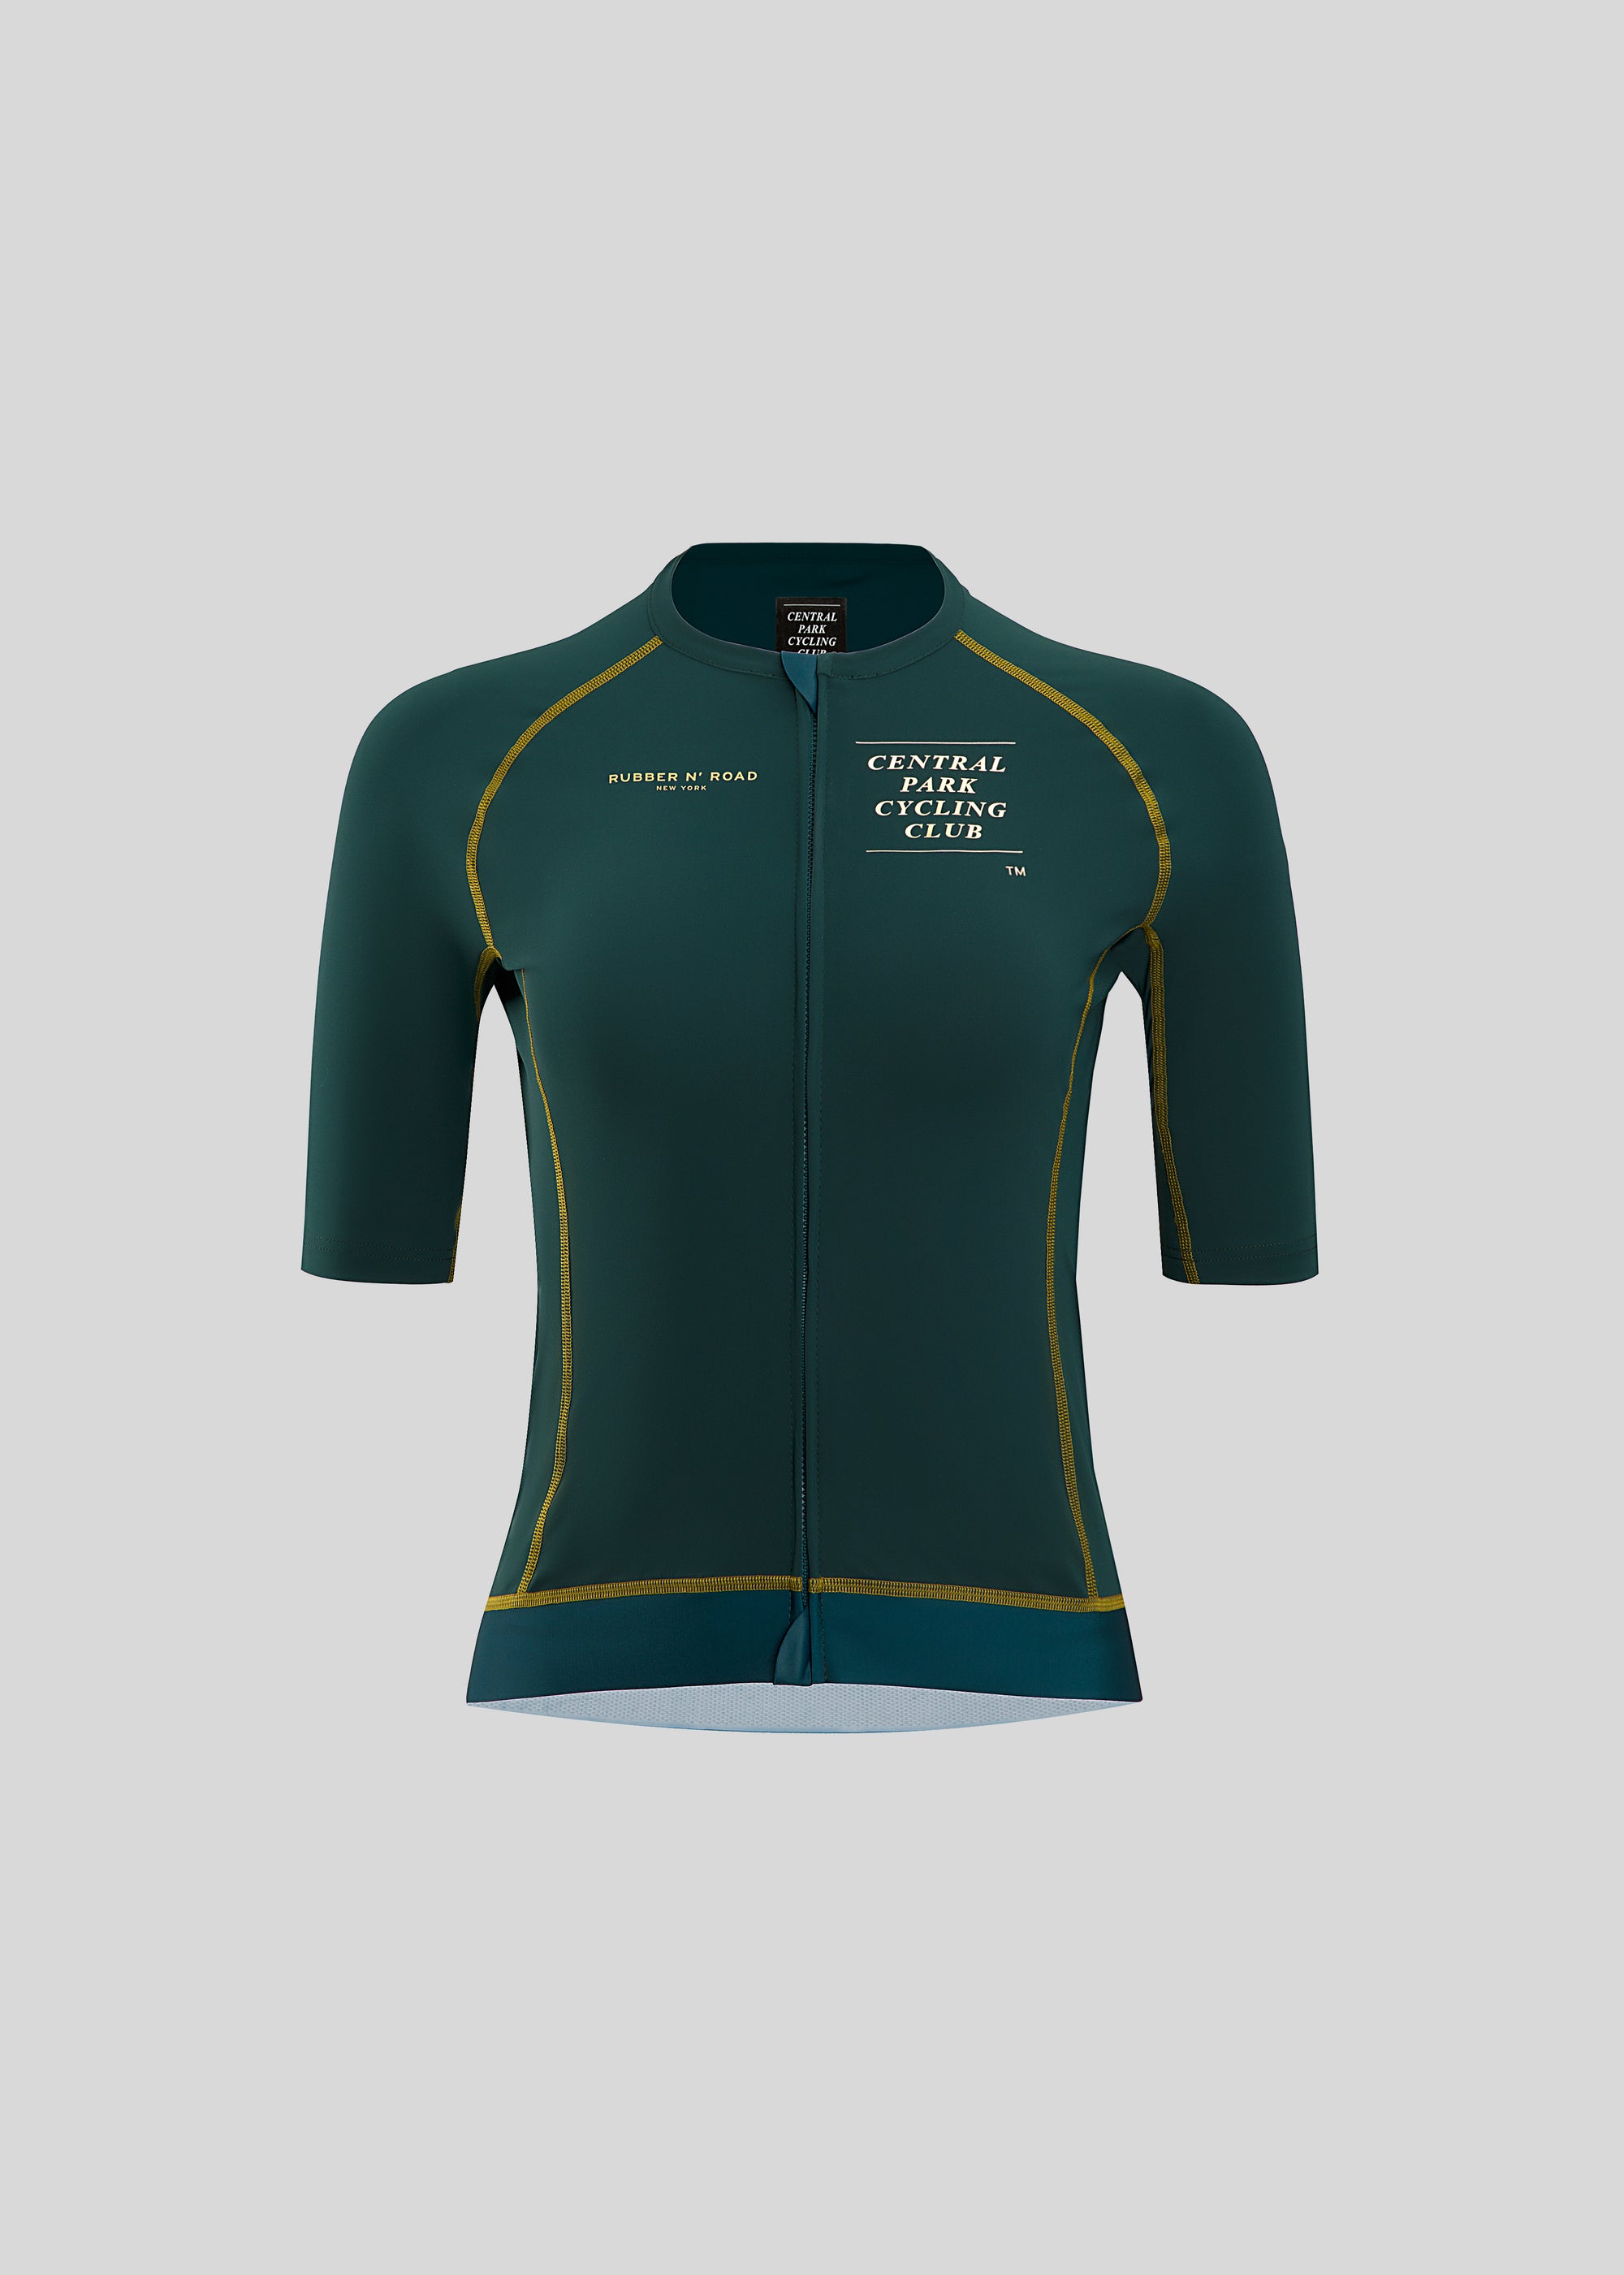 Women's Central Park Cycling Club™ Jersey